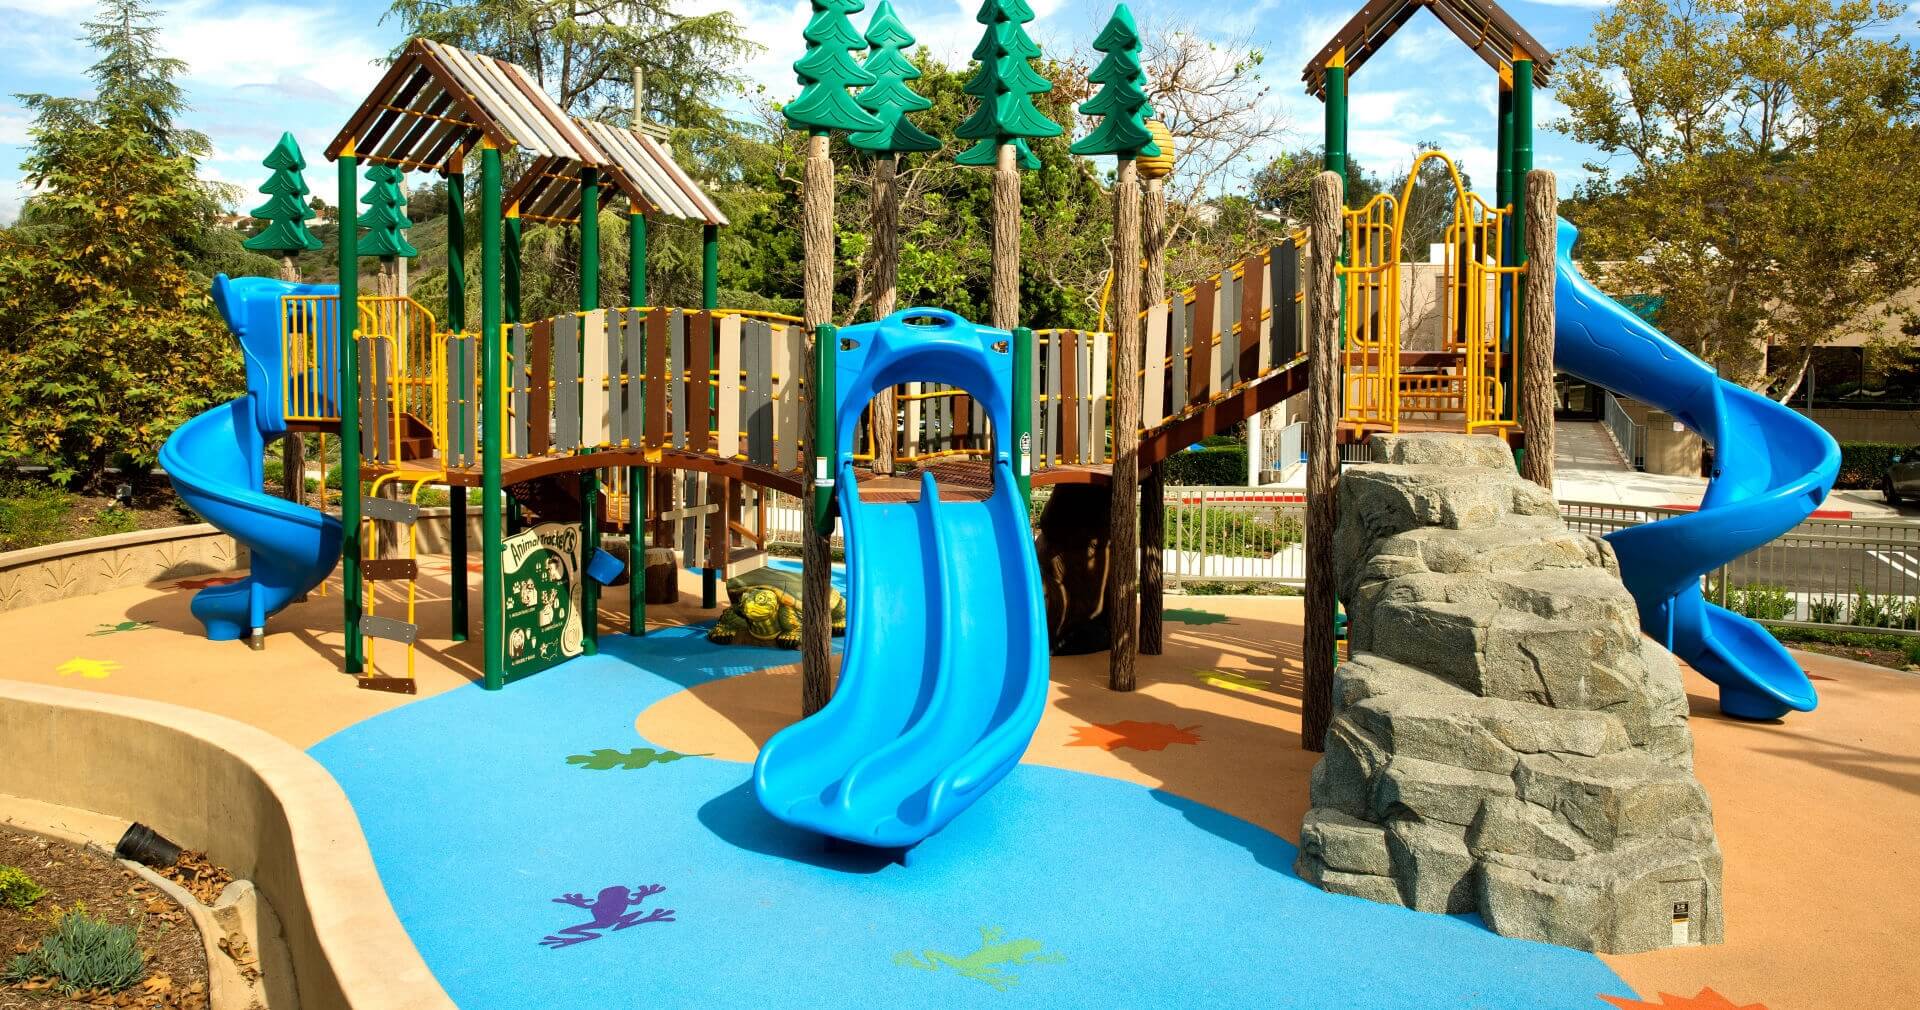 A playground with a poured rubber surface with frog graphics.